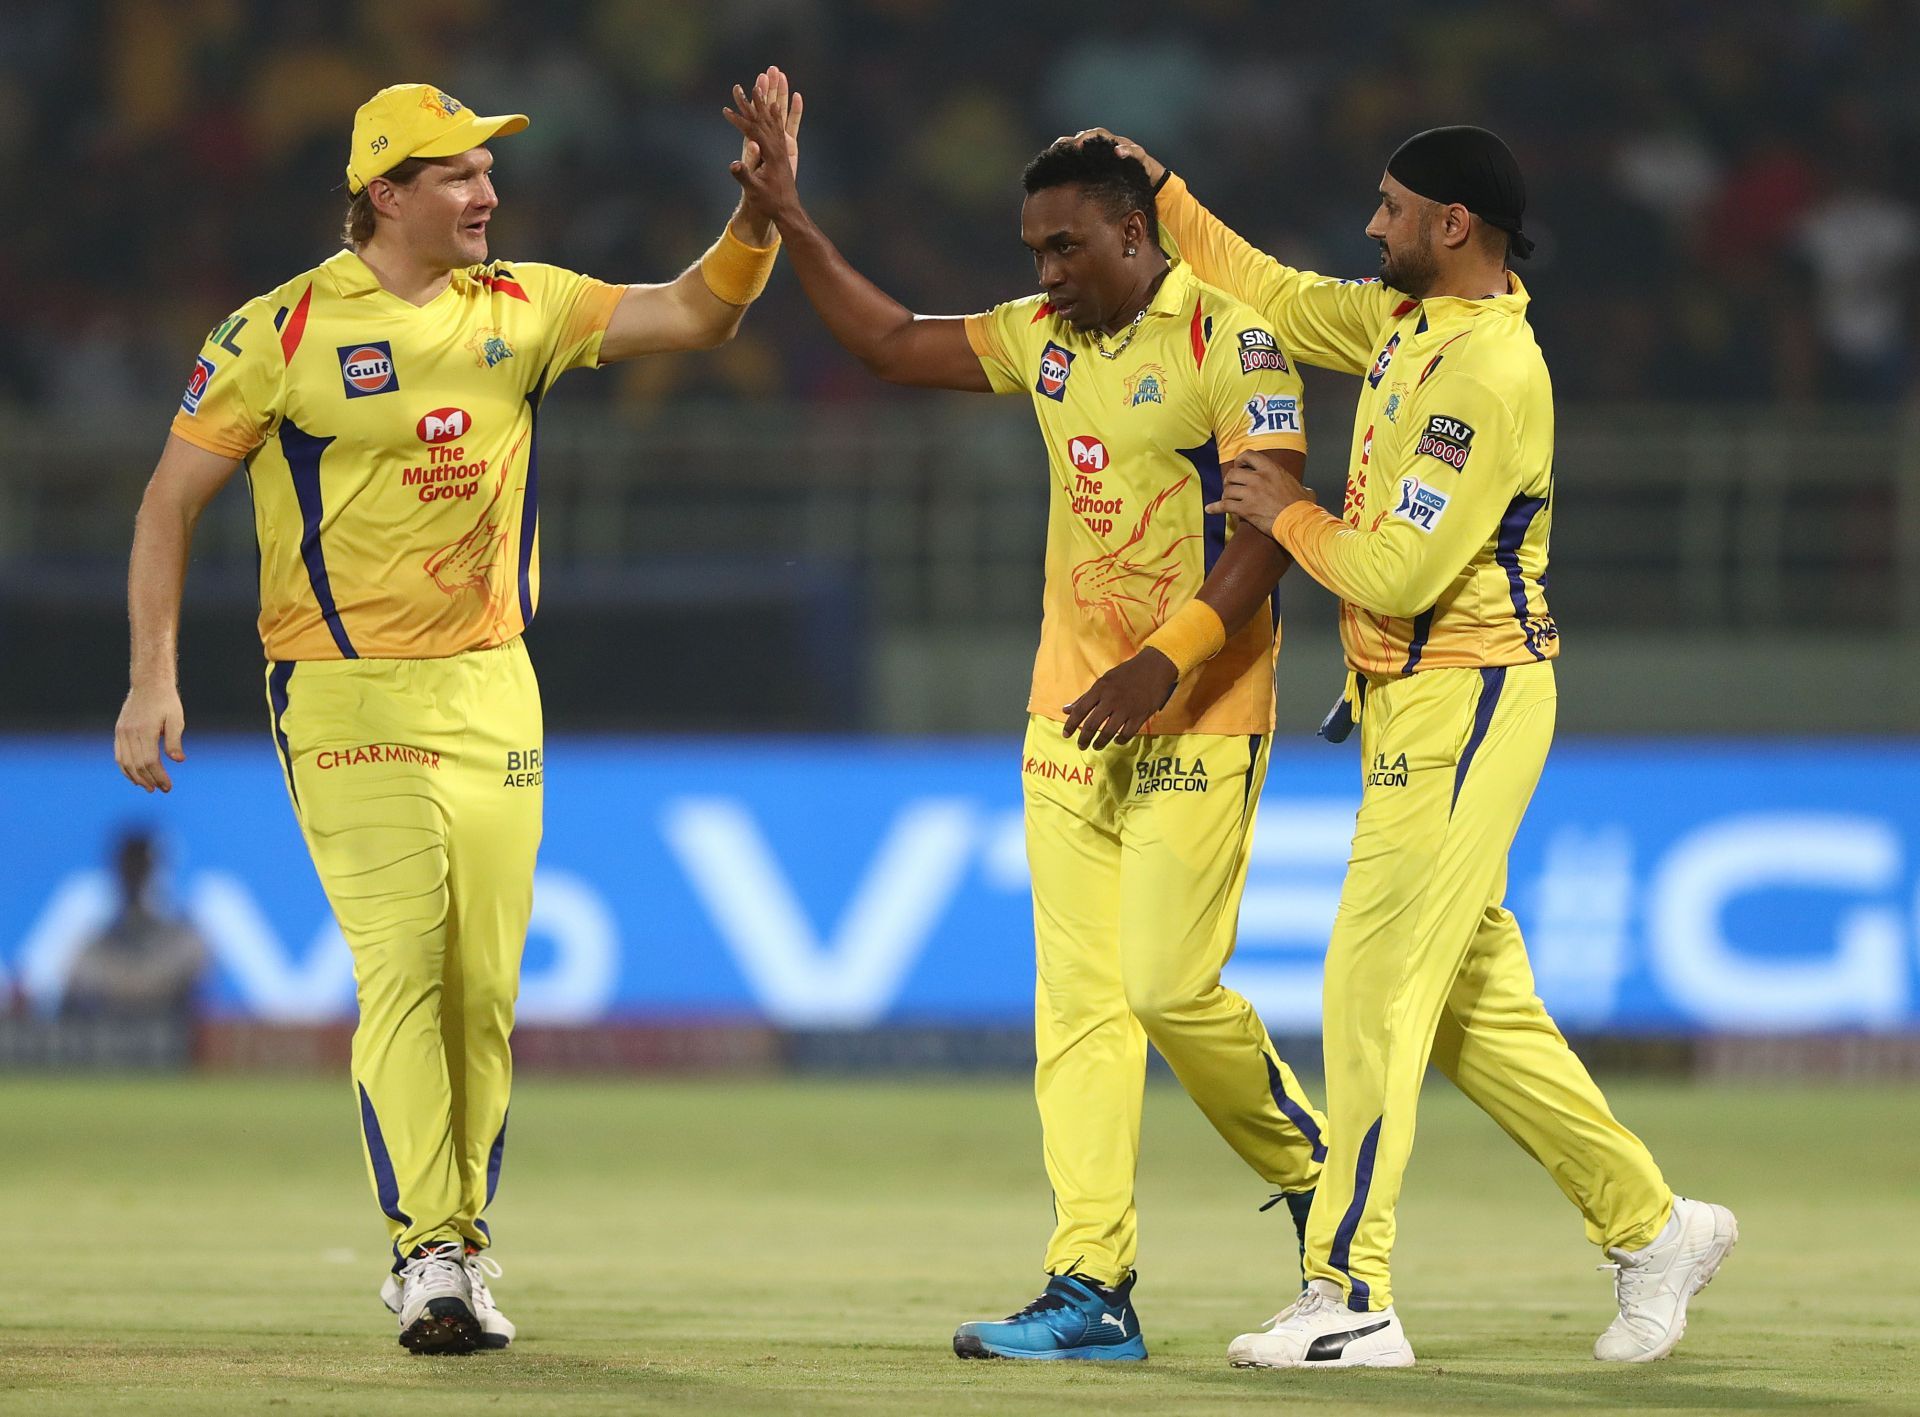 Dwayne Bravo is one of the highest wicket-takers in IPL hiistory